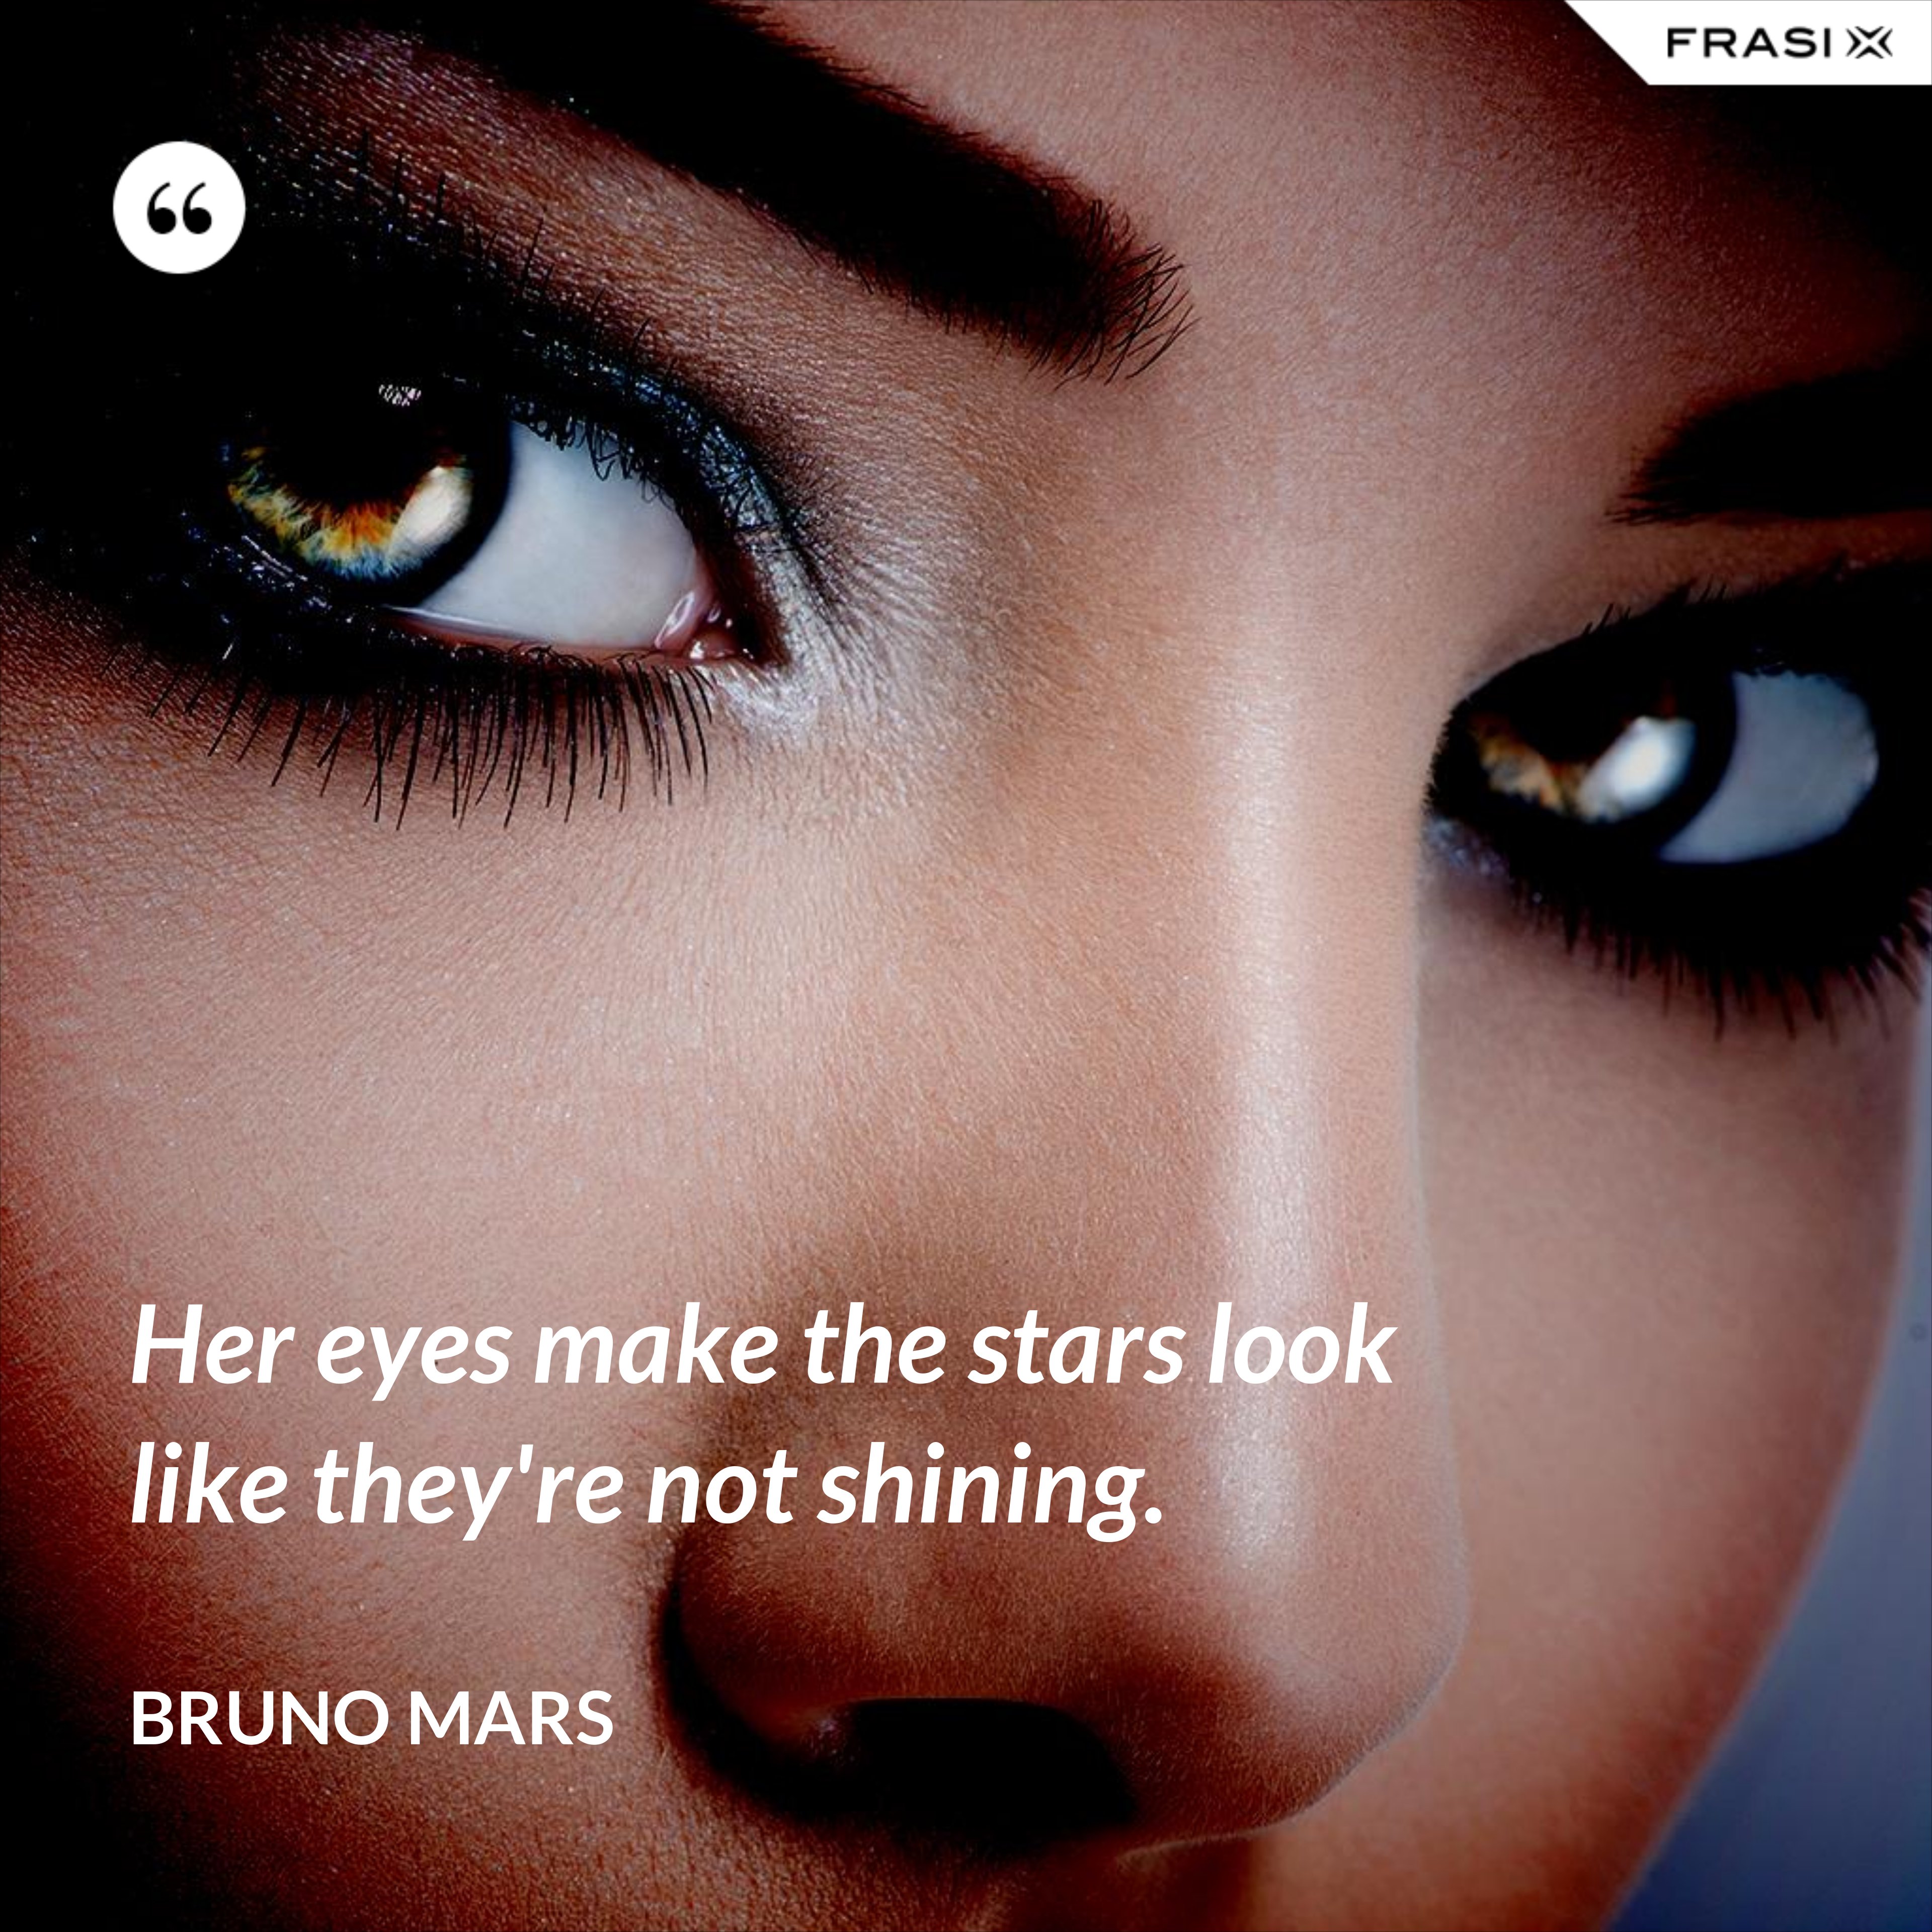 Her eyes make the stars look like they're not shining. - Bruno Mars